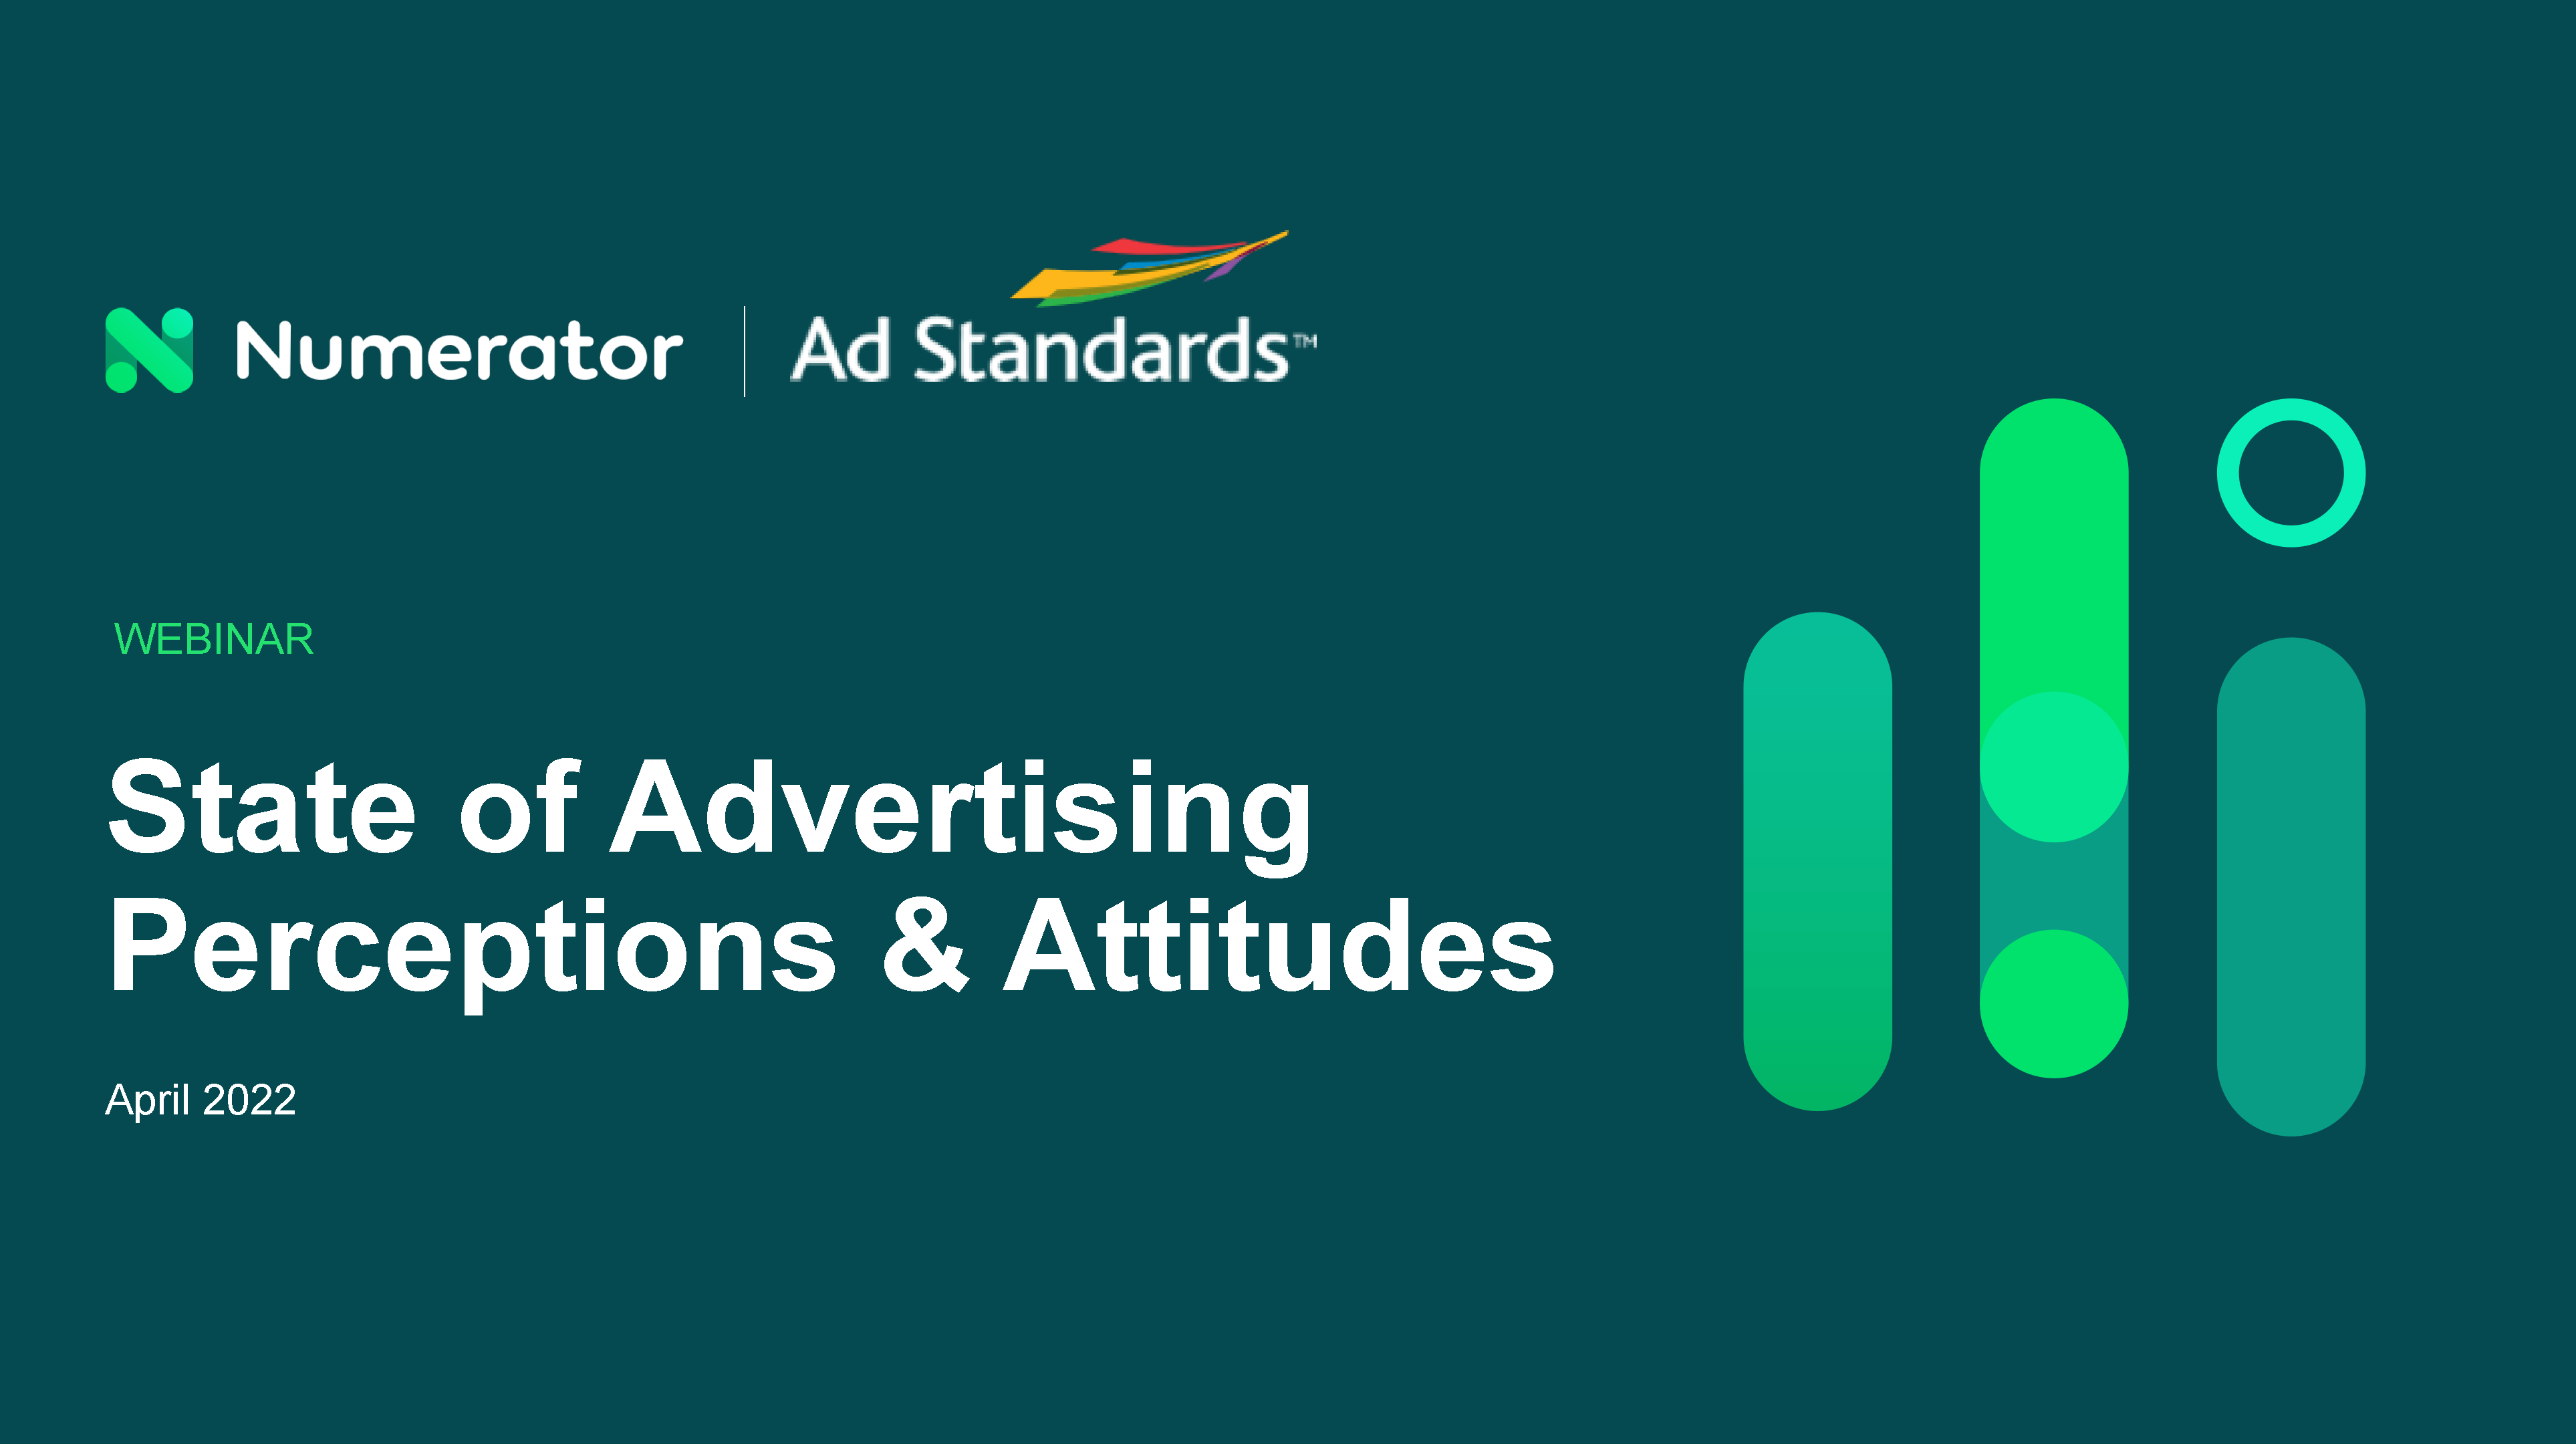 State of Advertising Perceptions & Attitudes - April 2022 | Presented by Numerator & Ad Standards